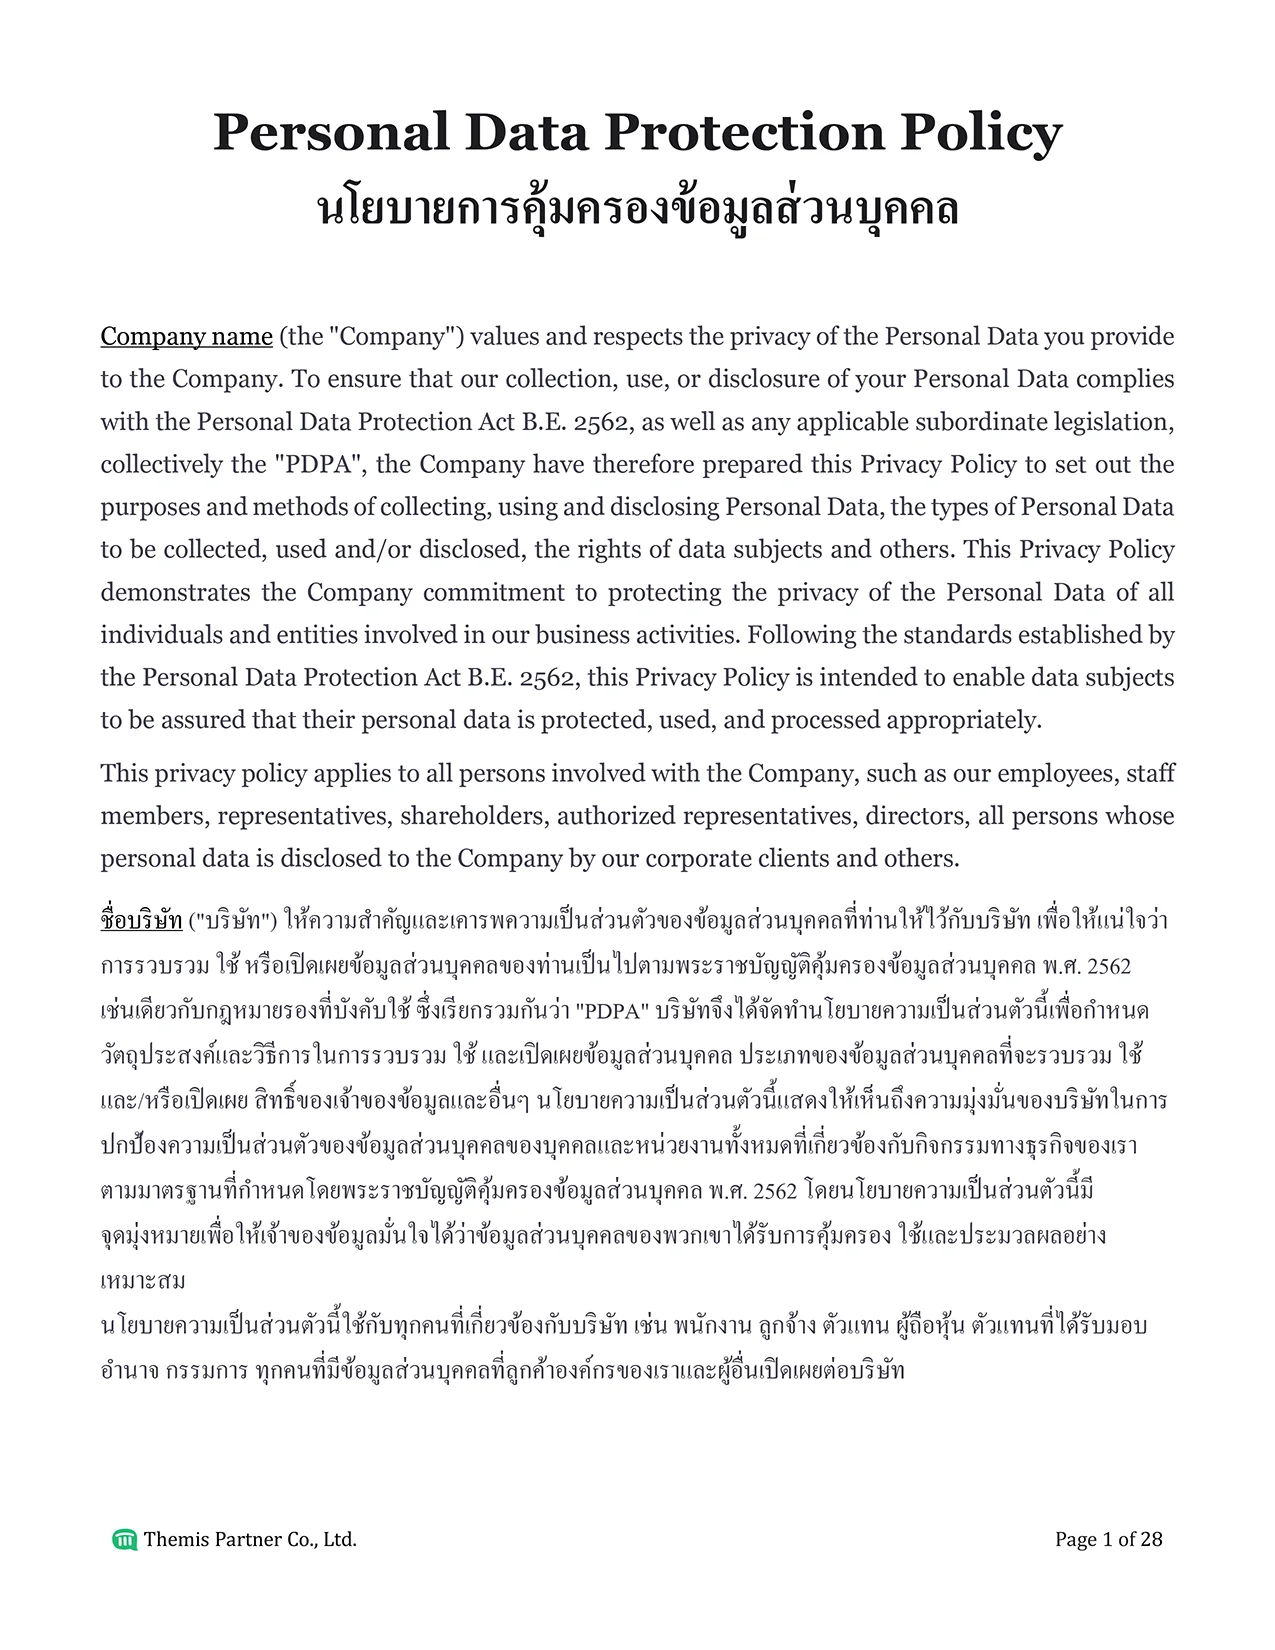 PDPA consent form and company policy Thailand 1